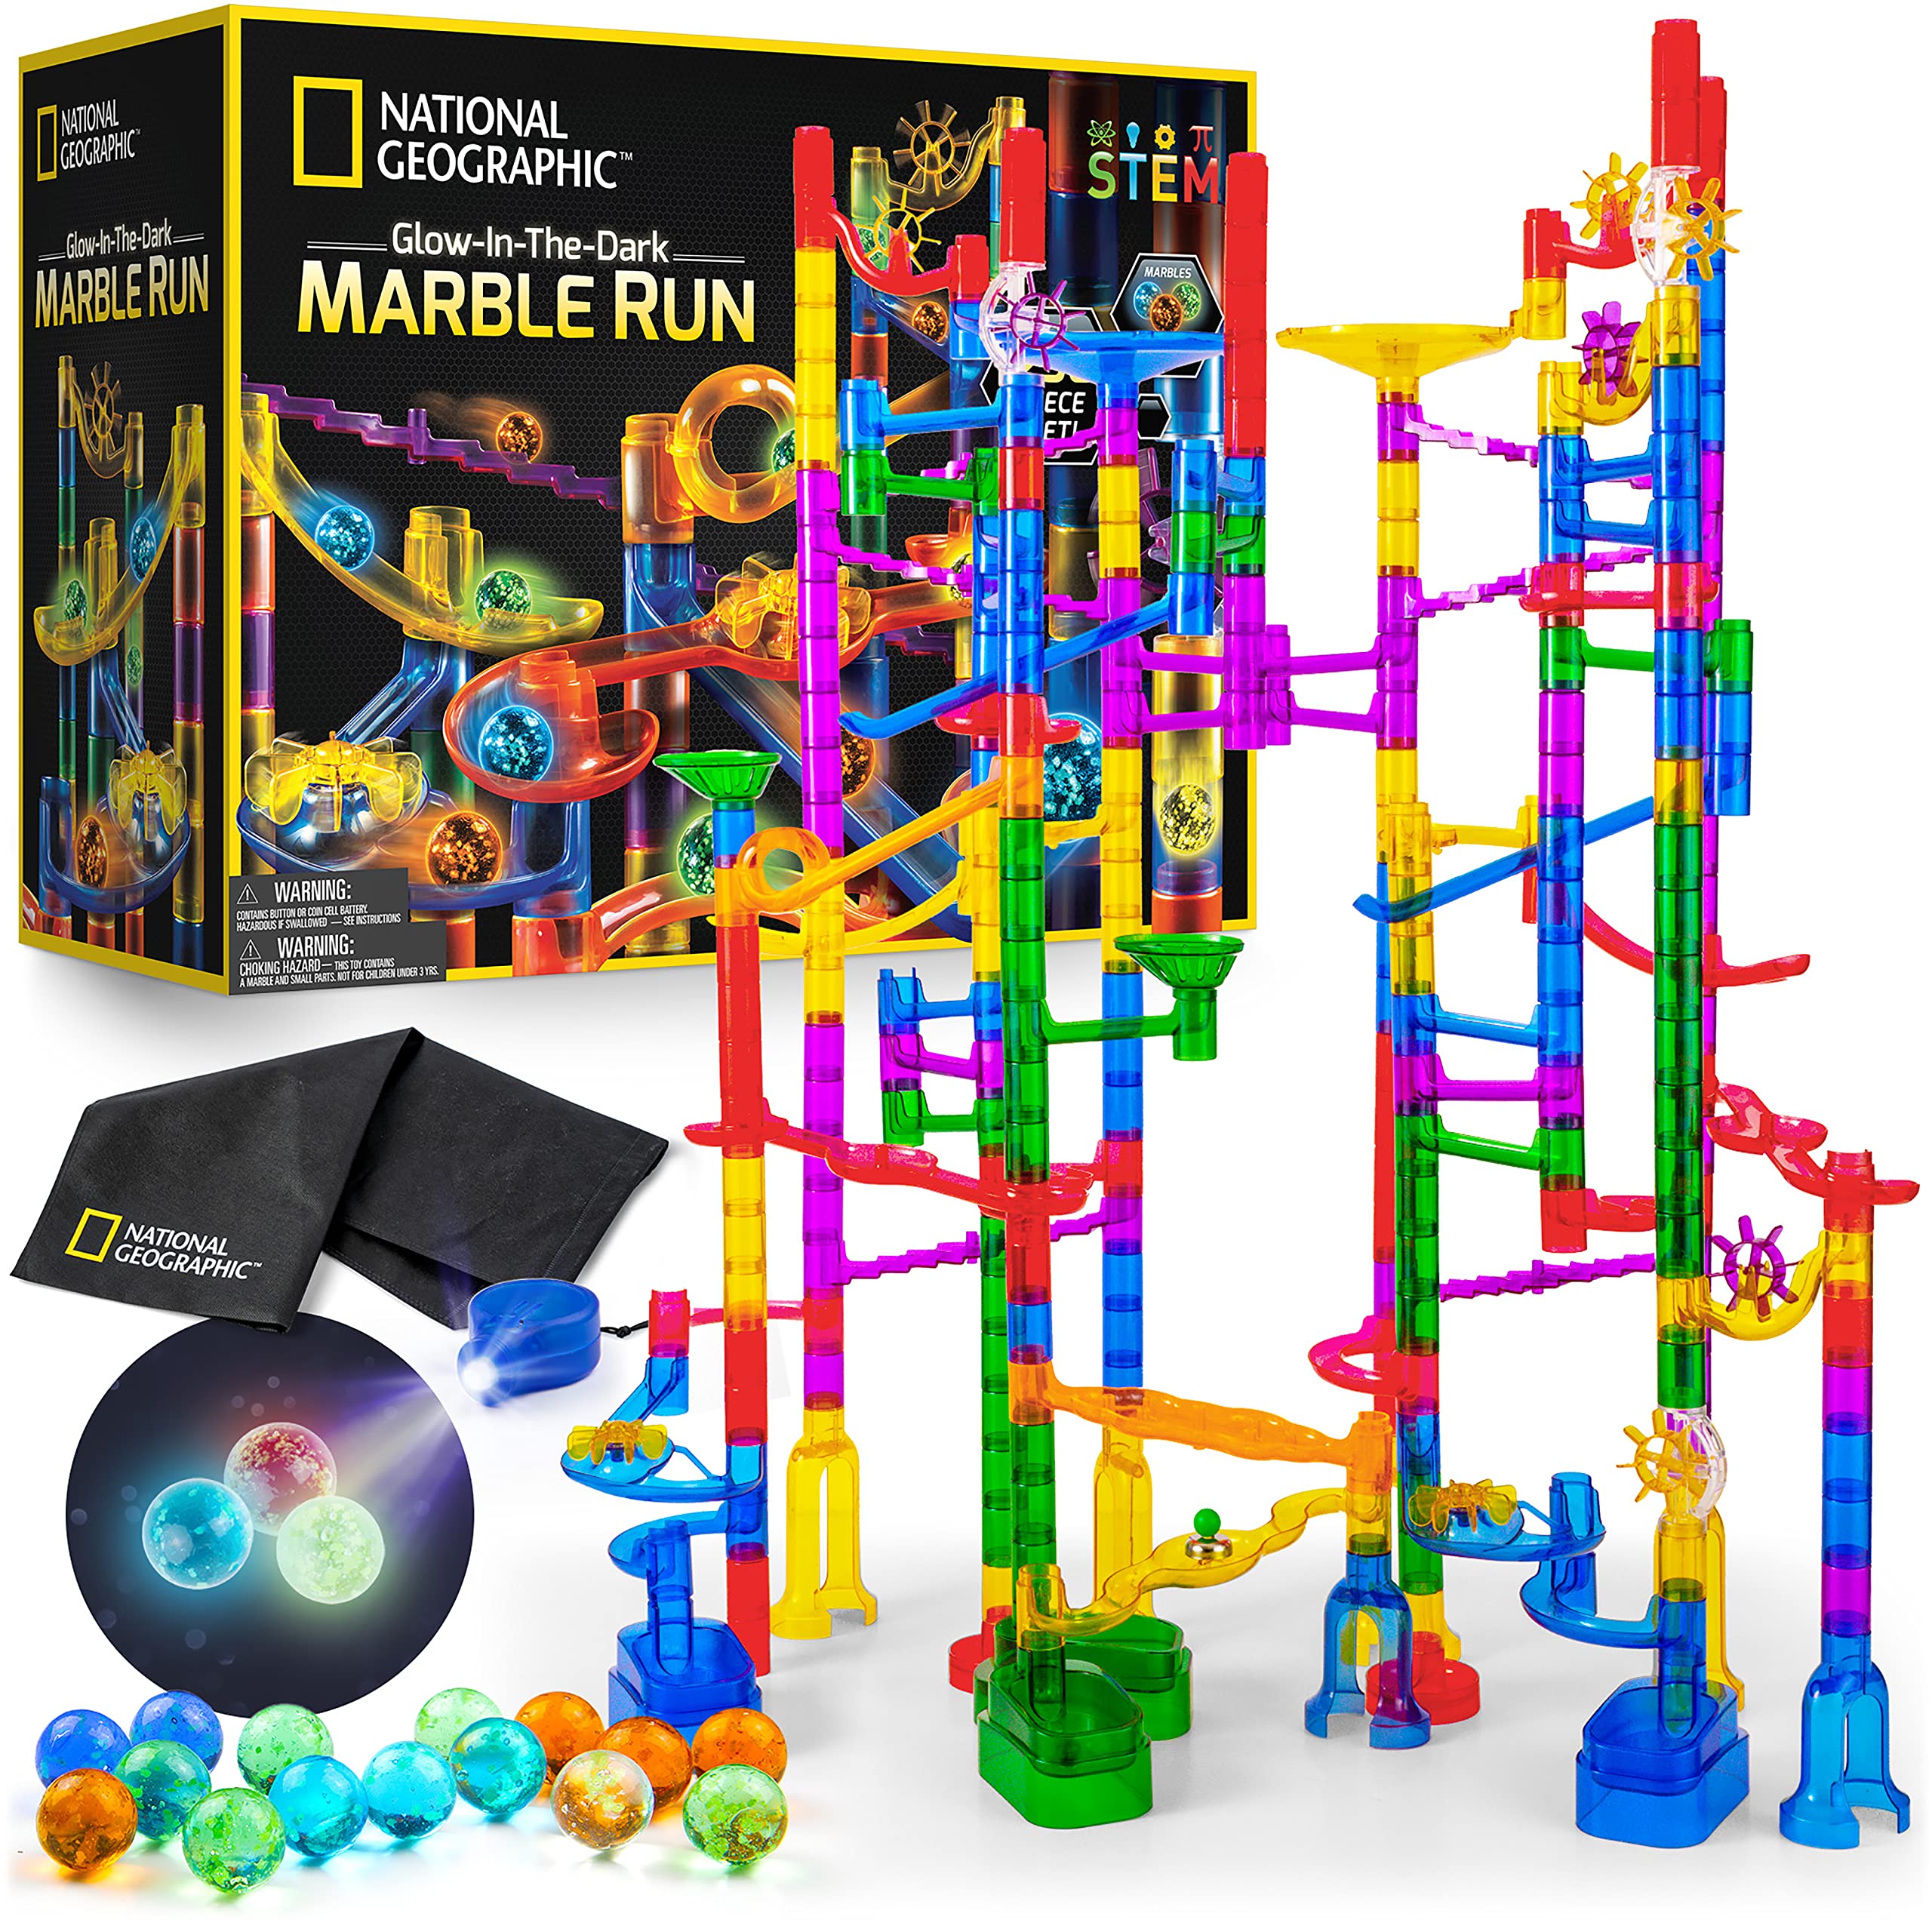 NATIONAL GEOGRAPHIC Glowing Marble Run – 250 Piece Construction Set with 50 Glow In The Dark Glass Marbles & Storage Bag, STEM Gifts for Boys and Girls, Building Project Toy (Amazon Exclusive)